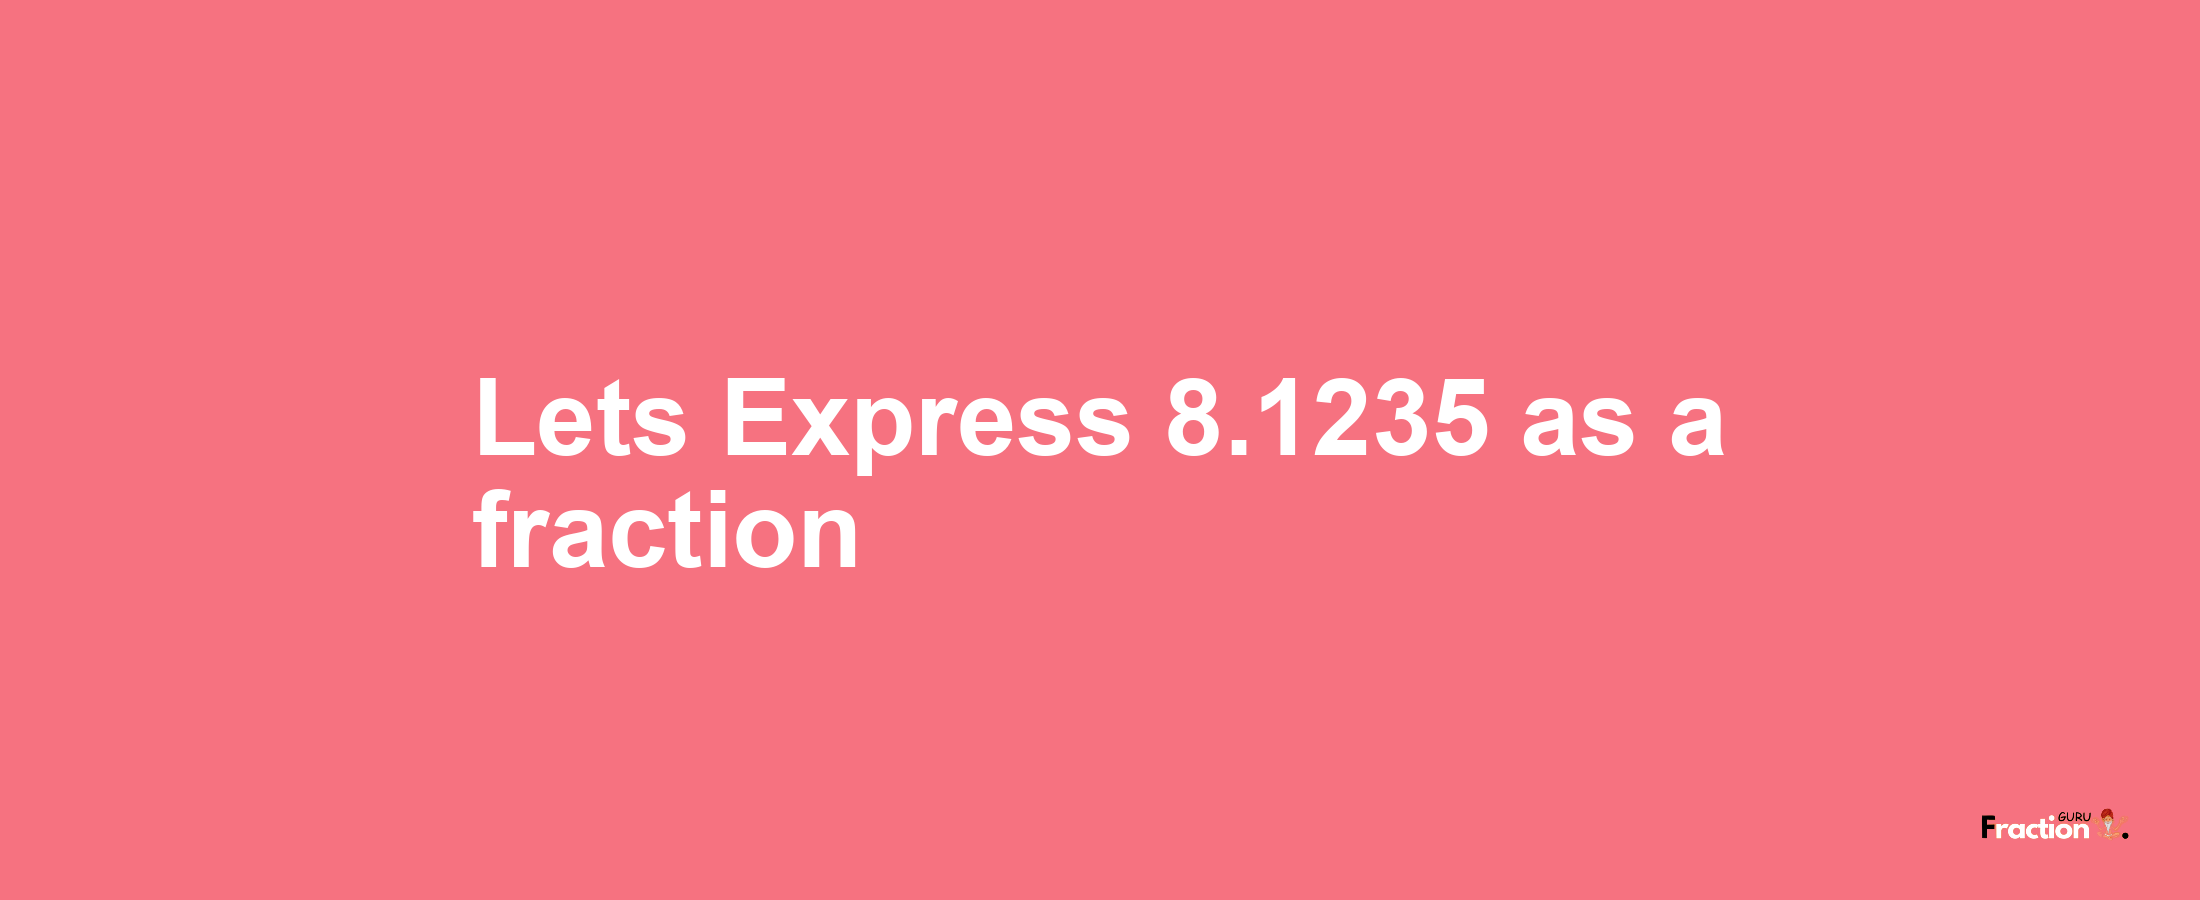 Lets Express 8.1235 as afraction